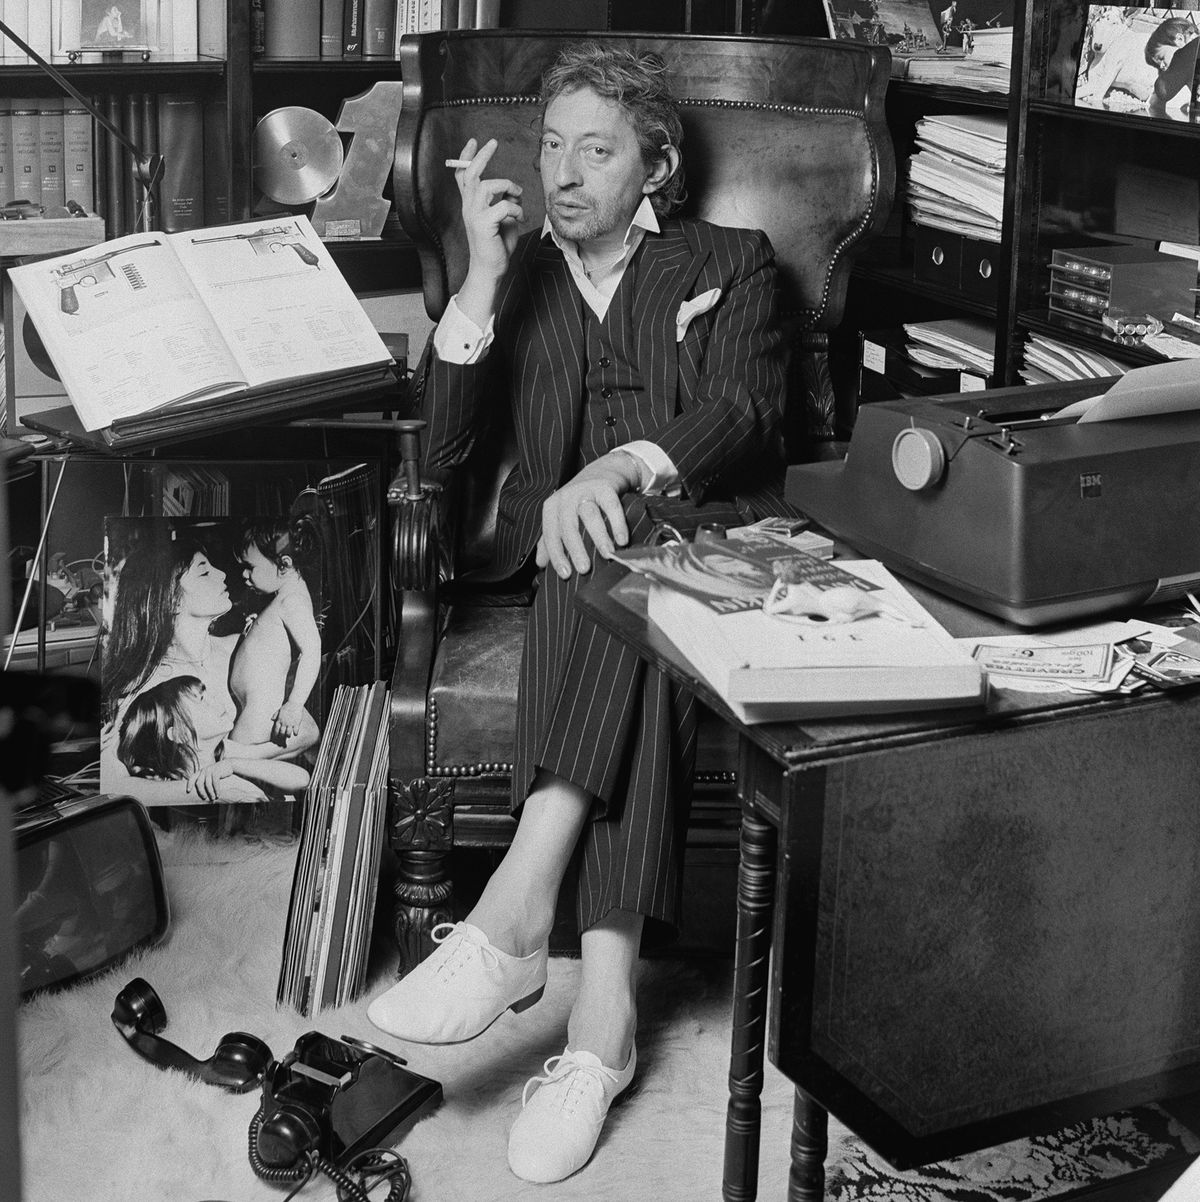 french singer songwriter and poet serge gainsbourg at home in his study photo by christian simonpietrisygma via getty images